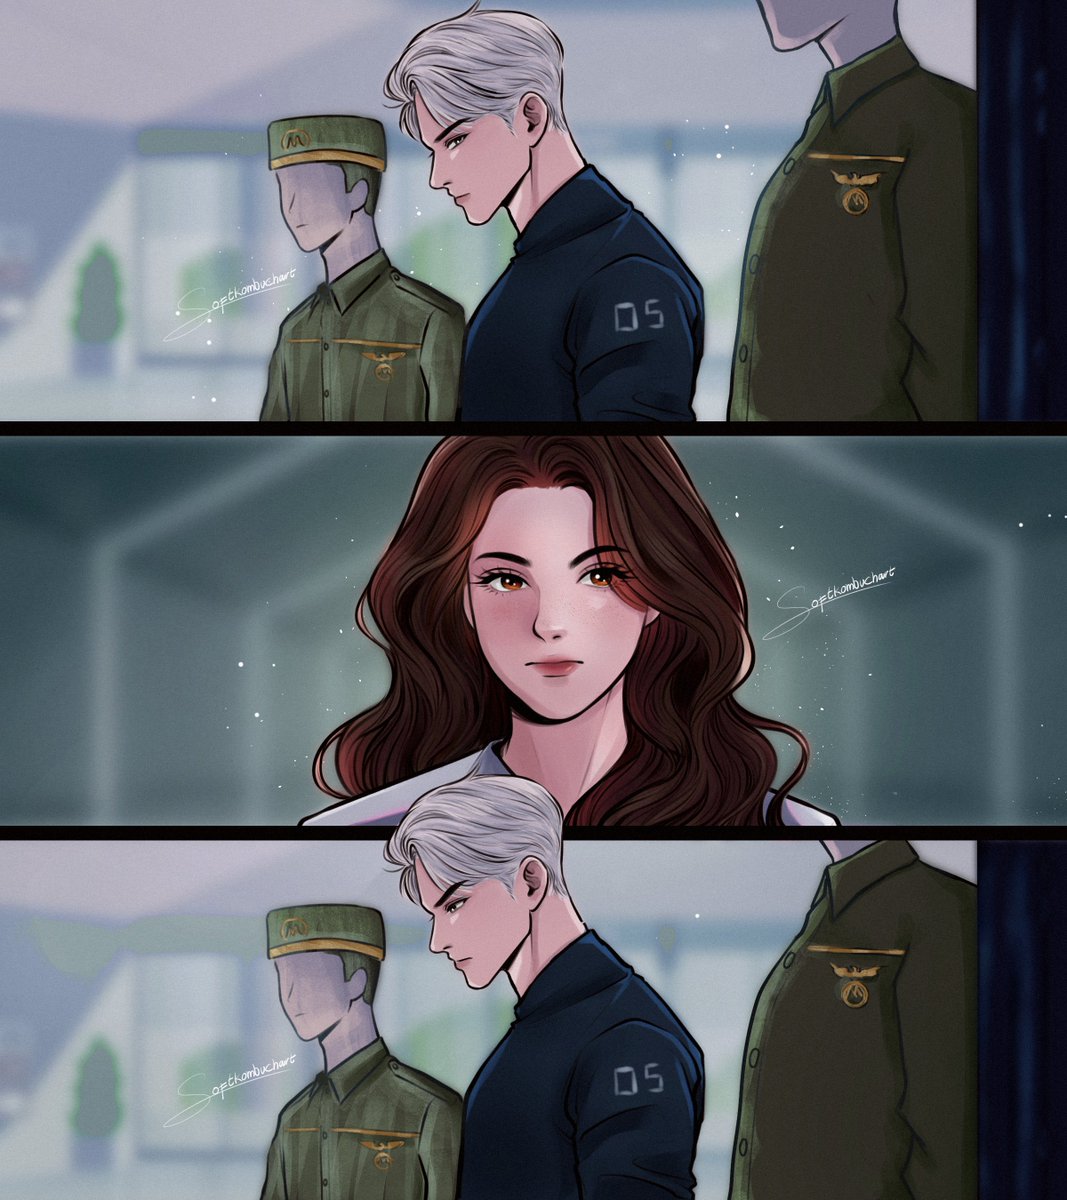 Hermione and Draco's first meeting after the second wizarding war as a public defender and her client

#dramione #DracoMalfoy #HermioneGranger